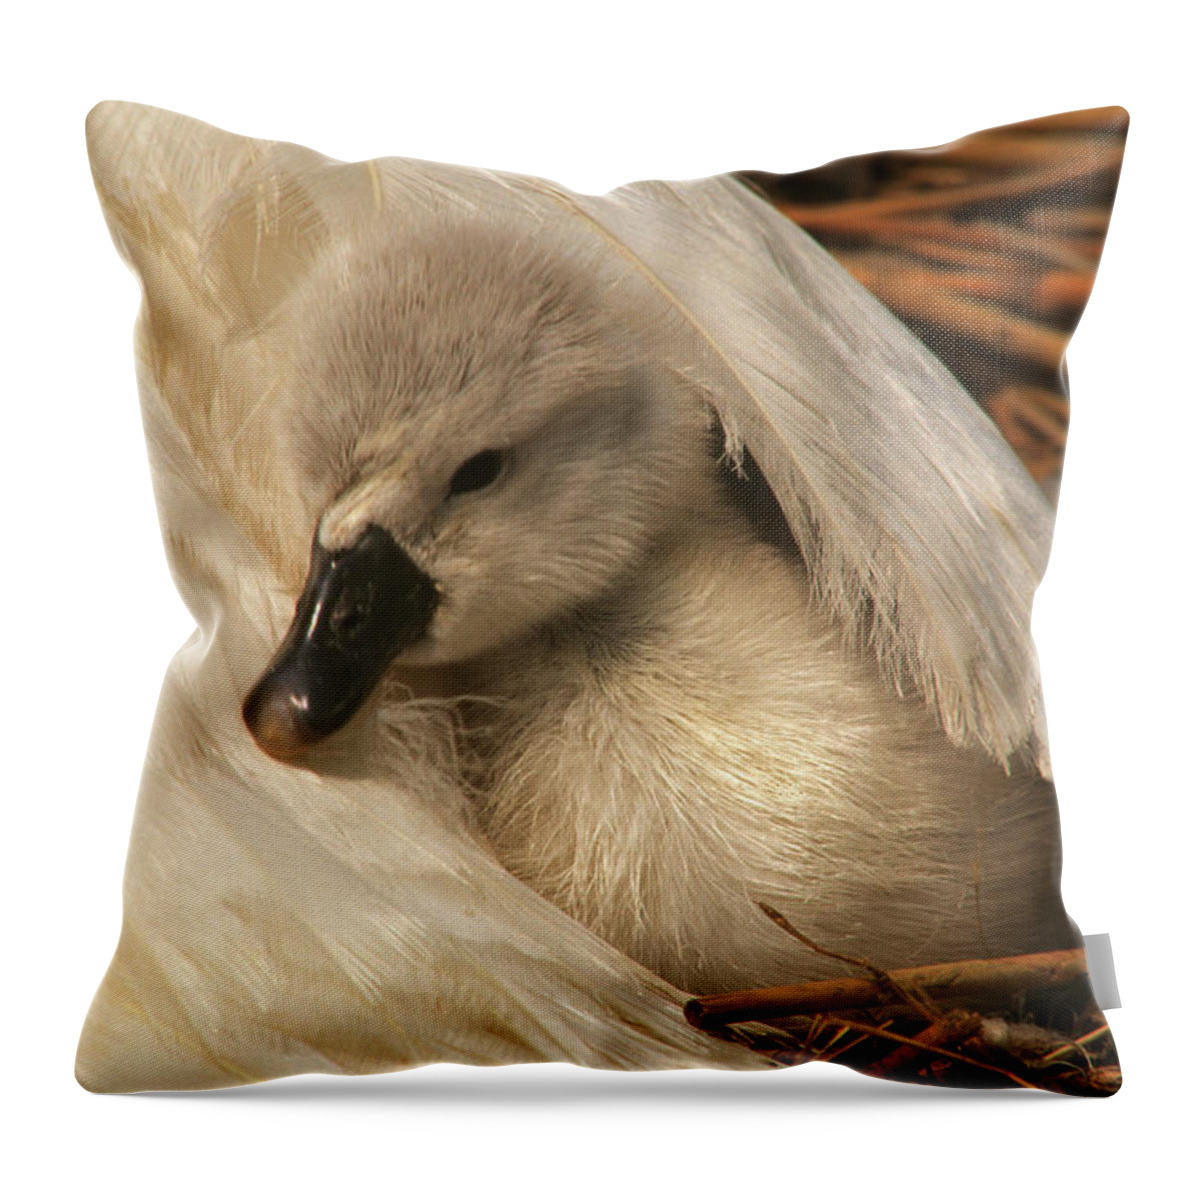 Fn Throw Pillow featuring the photograph Mute Swan Cygnet Under Wing by Flip De Nooyer